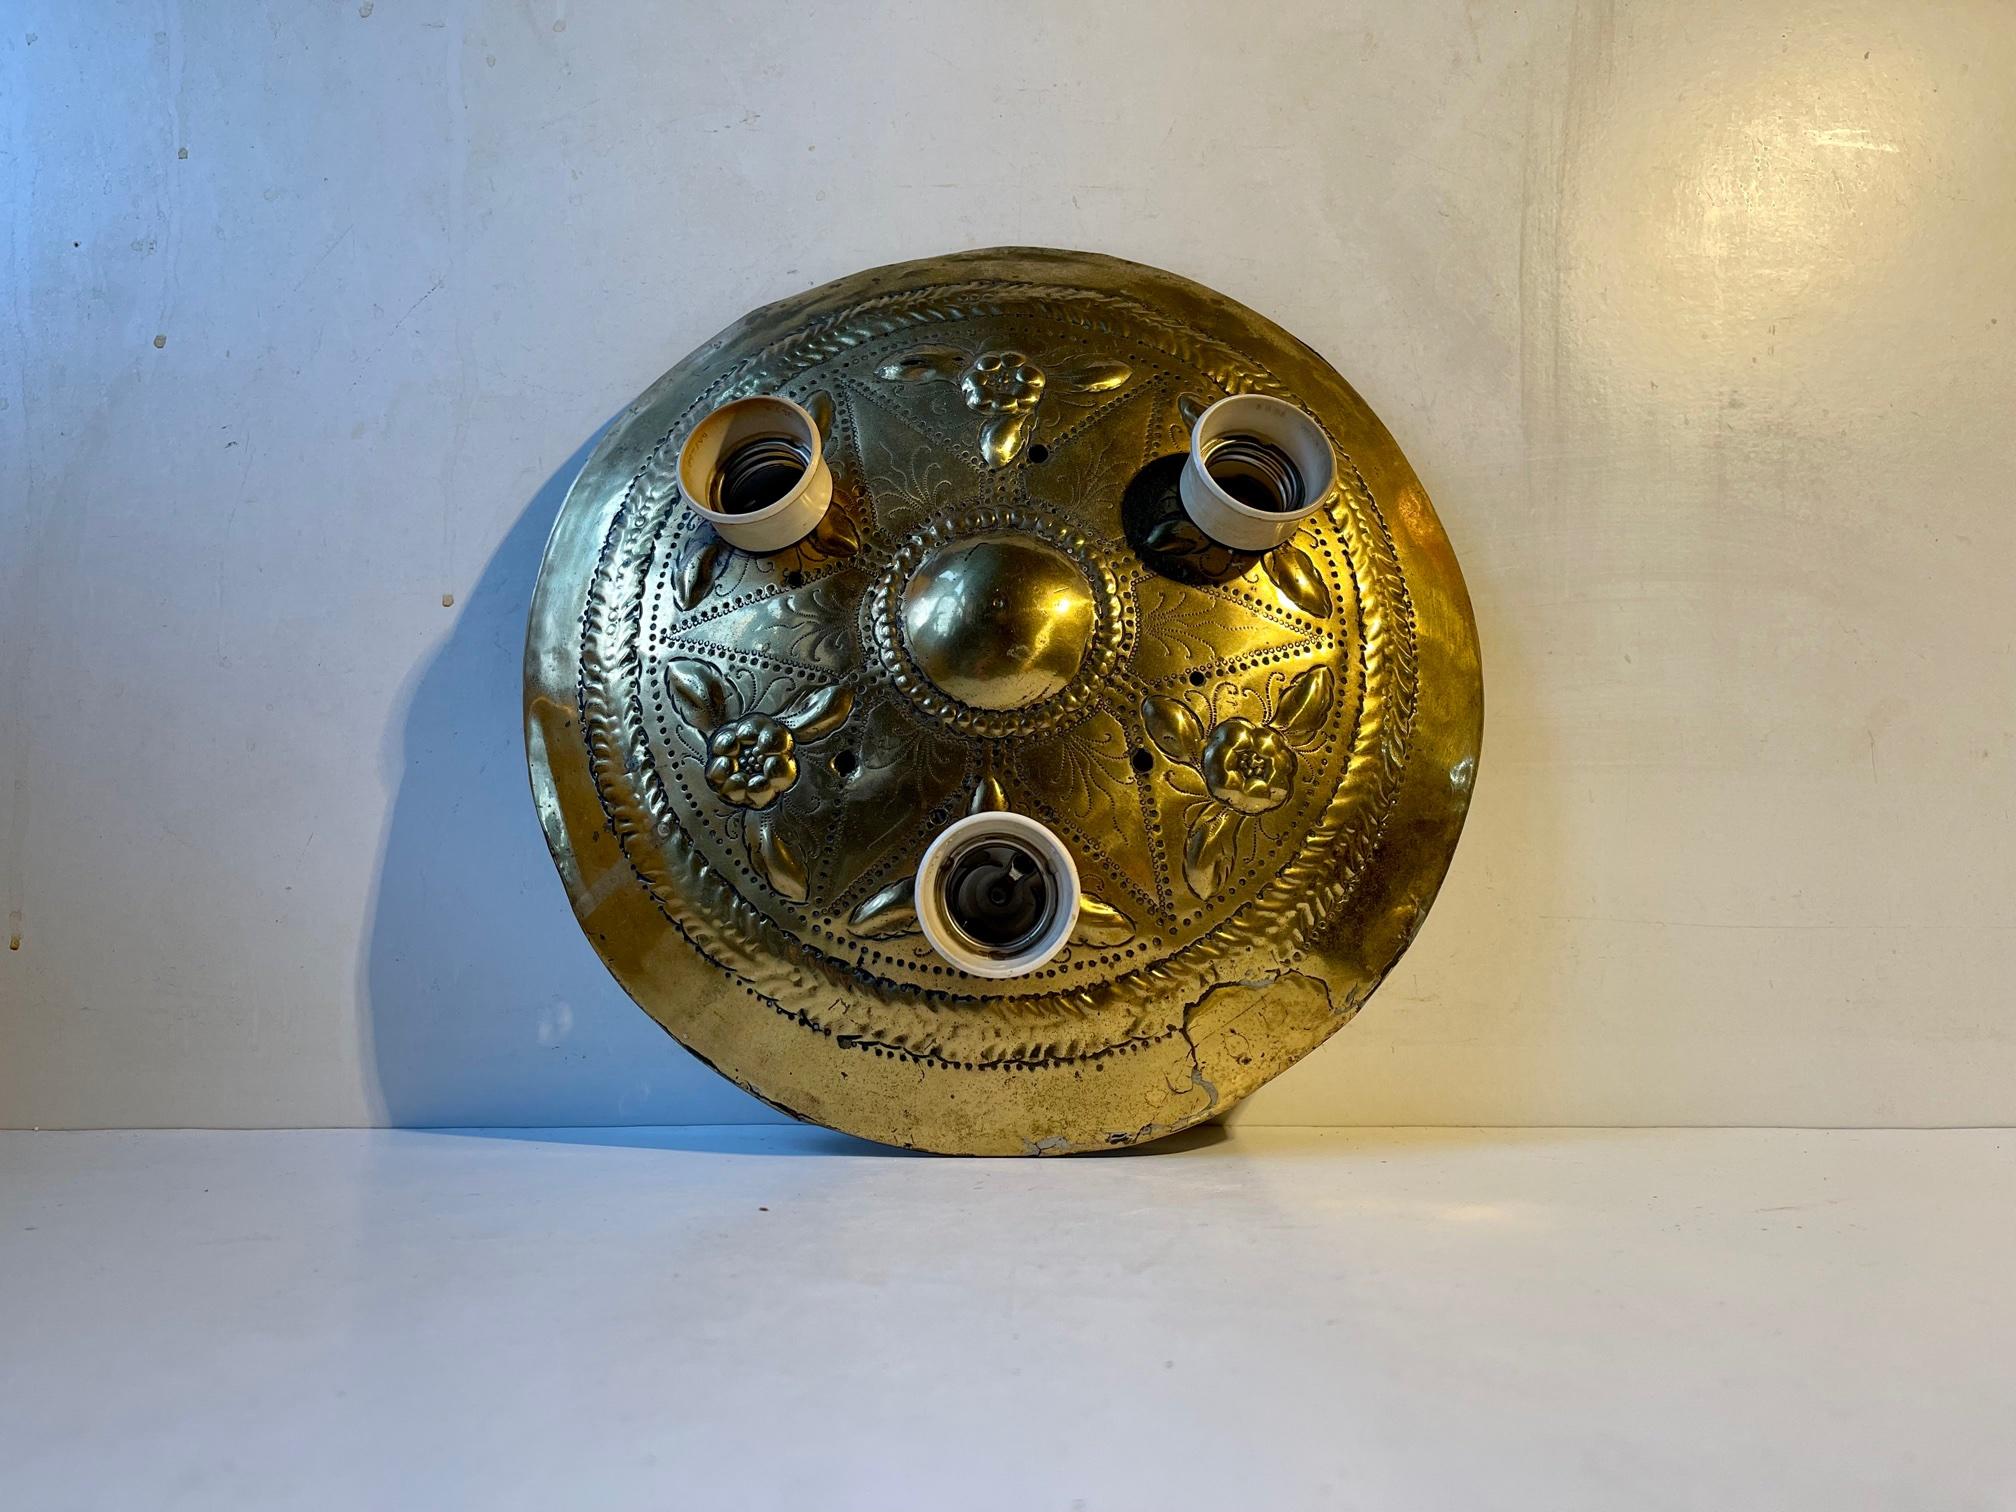 It does not get much sustainable than this; vintage, hippie and repurposed. Antique embossed brass wall shield built into a lamp with 3 lightsources. It can be installed as either a wall or ceiling fixture. It was Custom/Hippie made in Denmark